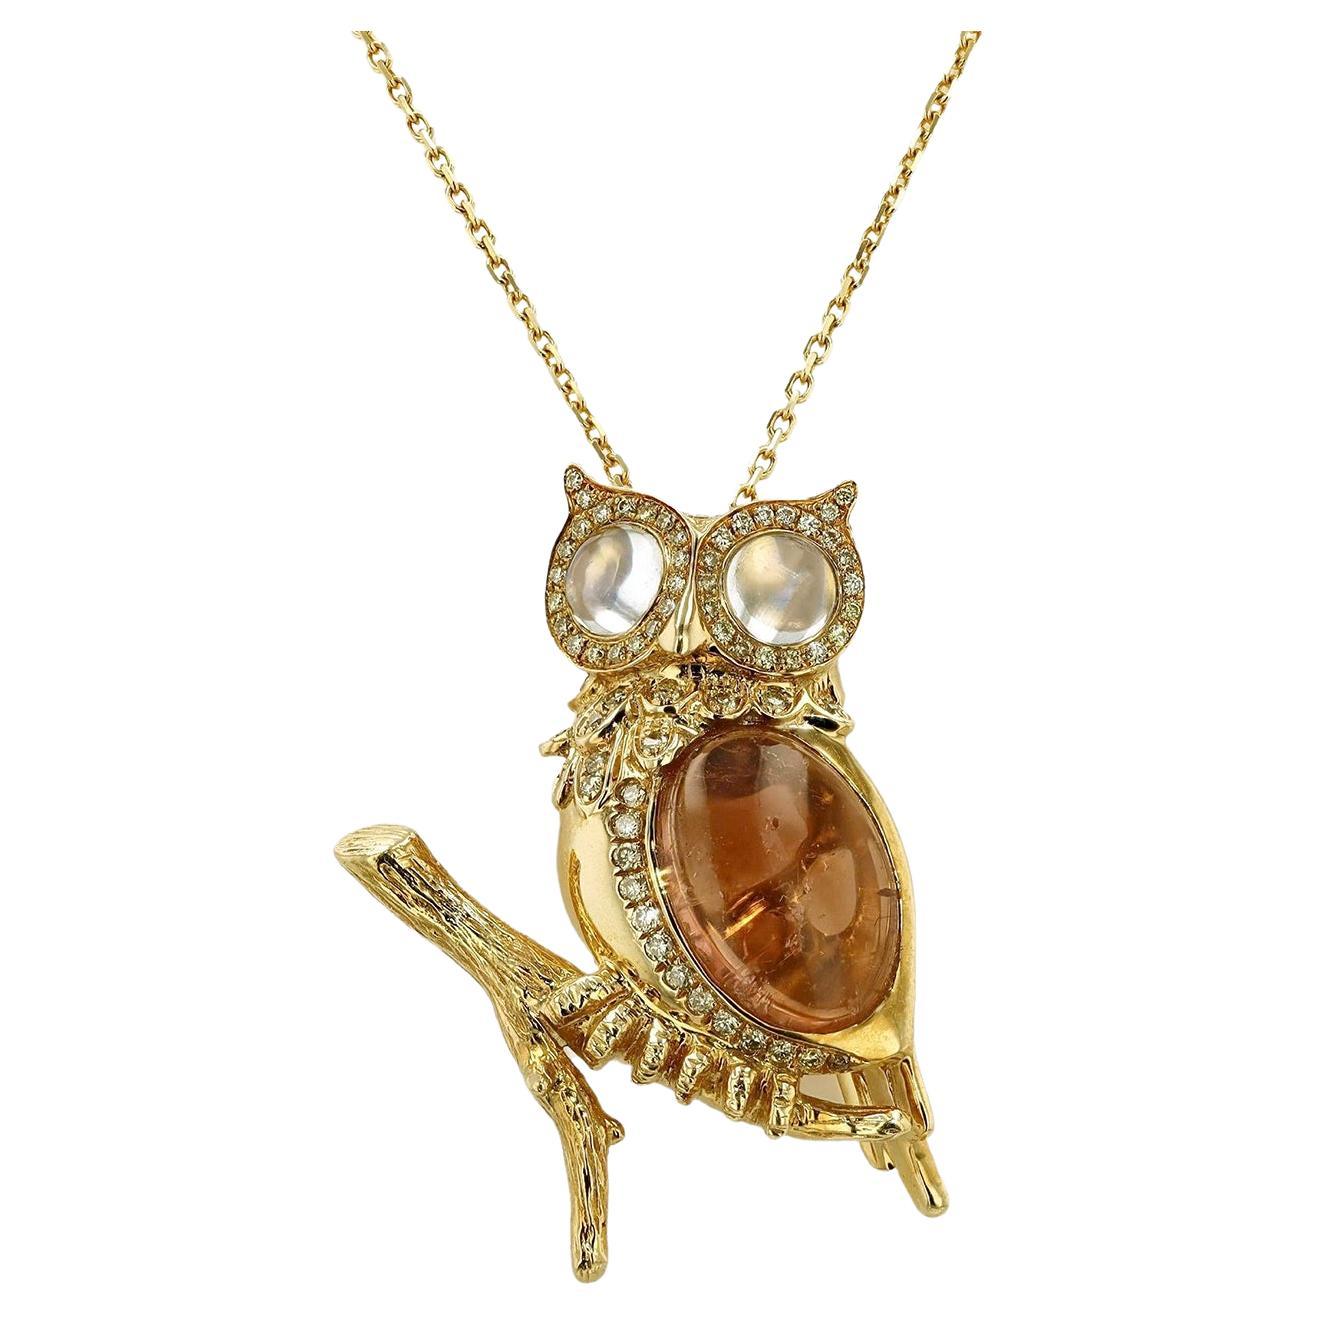 Vintage Tourmaline and Moonstone Owl Necklace